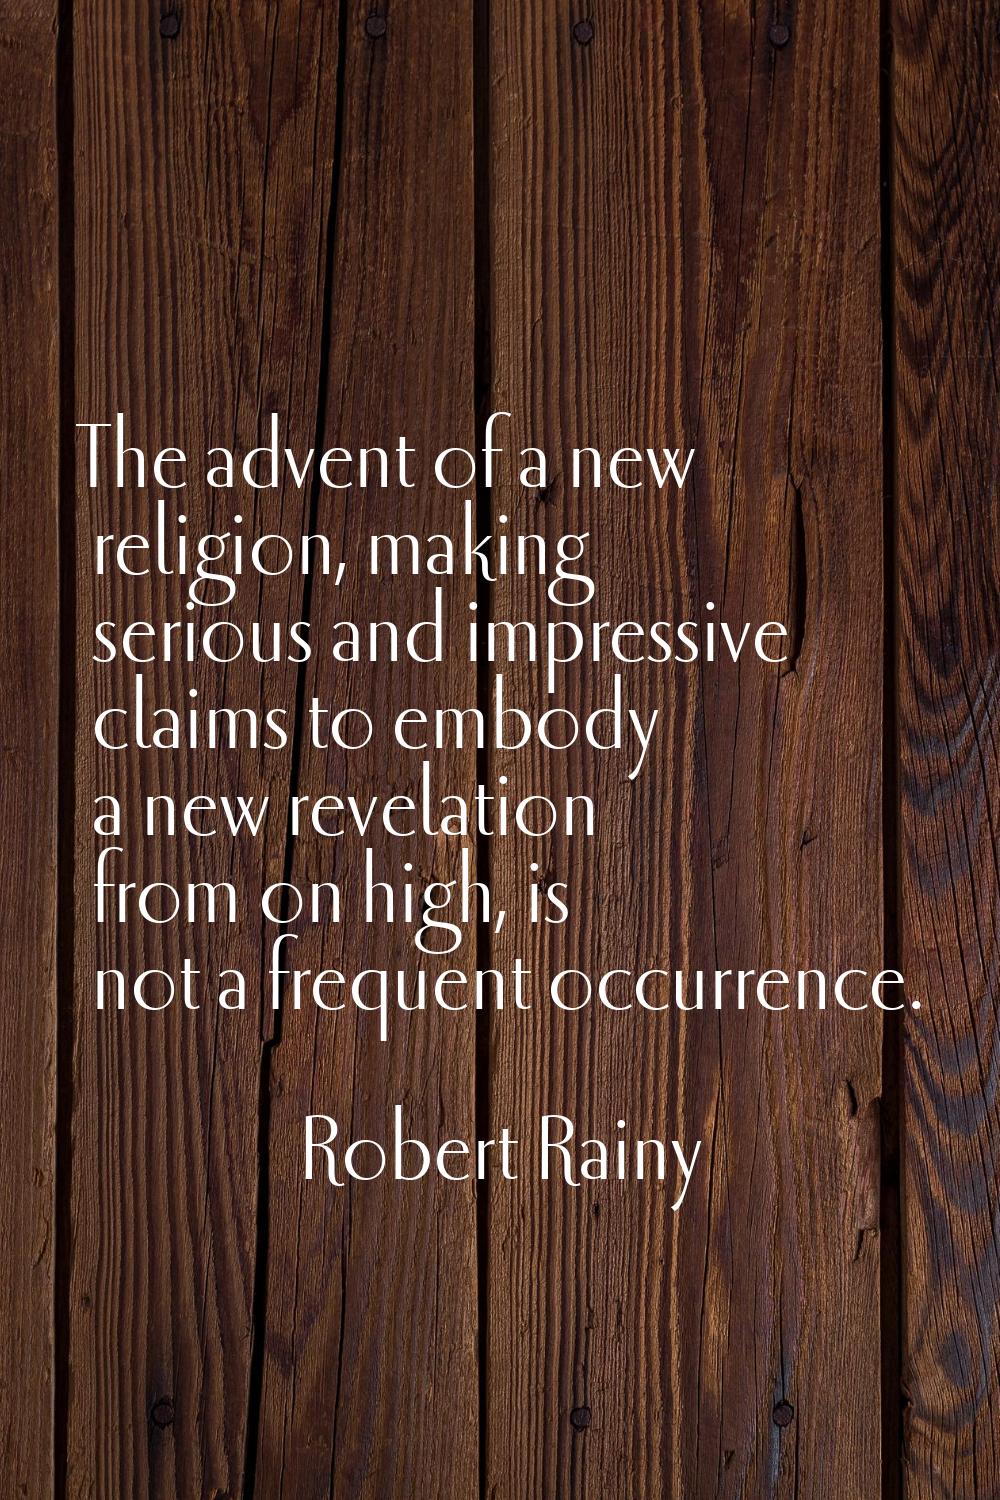 The advent of a new religion, making serious and impressive claims to embody a new revelation from 